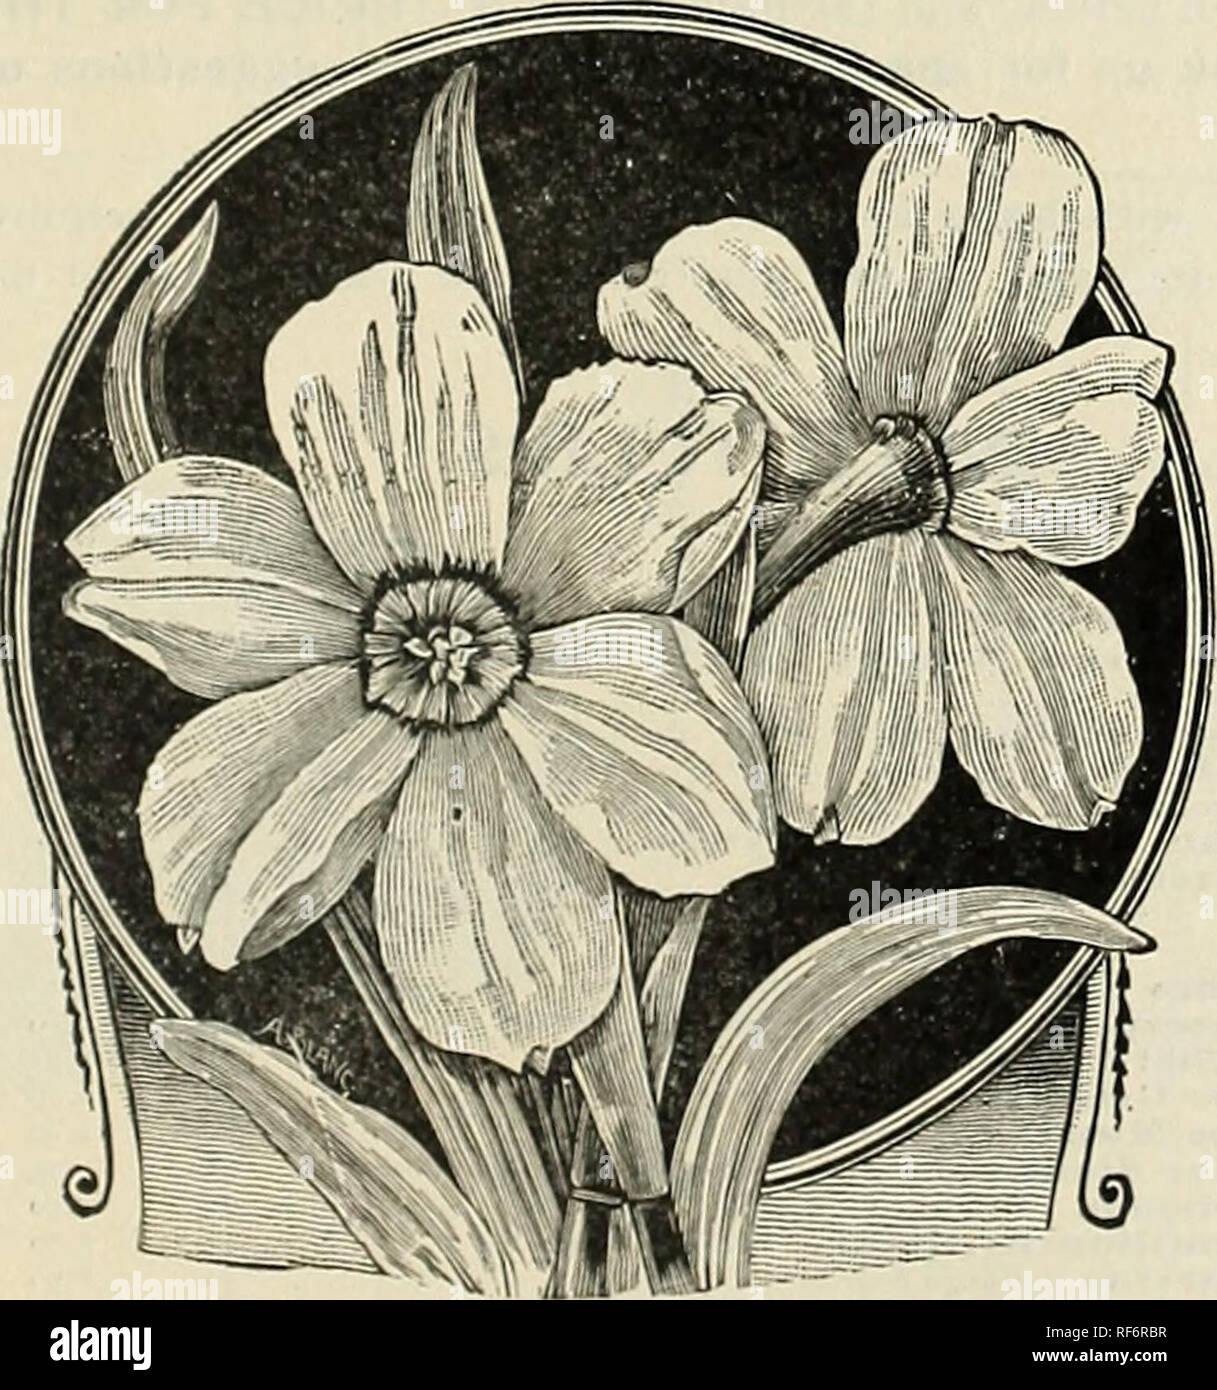 . Michell's bulbs, seeds, plants, etc. : autumn guide 1902. Nursery stock Pennsylvania Philadelphia Catalogs; Flowers Seeds Catalogs; Bulbs (Plants) Catalogs; Gardening Equipment and supplies Catalogs. llllilif HorsGeldi Bicolor Narcissus, UorMllcldl Bicolor. Very large, perianth white, trumpet golden yellow ; the finest of all. Each, lo cts.; per doz., 80 cts : per 100, 55 50. Stella Iiieomparabllls. Vhite star-shaped flower, wiih distinct yellow trumpet. 3 cts. each ; per doz.. I'o cts.; per 100, $1 25. Trumpet Major. 1 he lar^^e yellow favorite. Each, 4 cts ; per doz., 25 cts ; per 100,51. Stock Photo